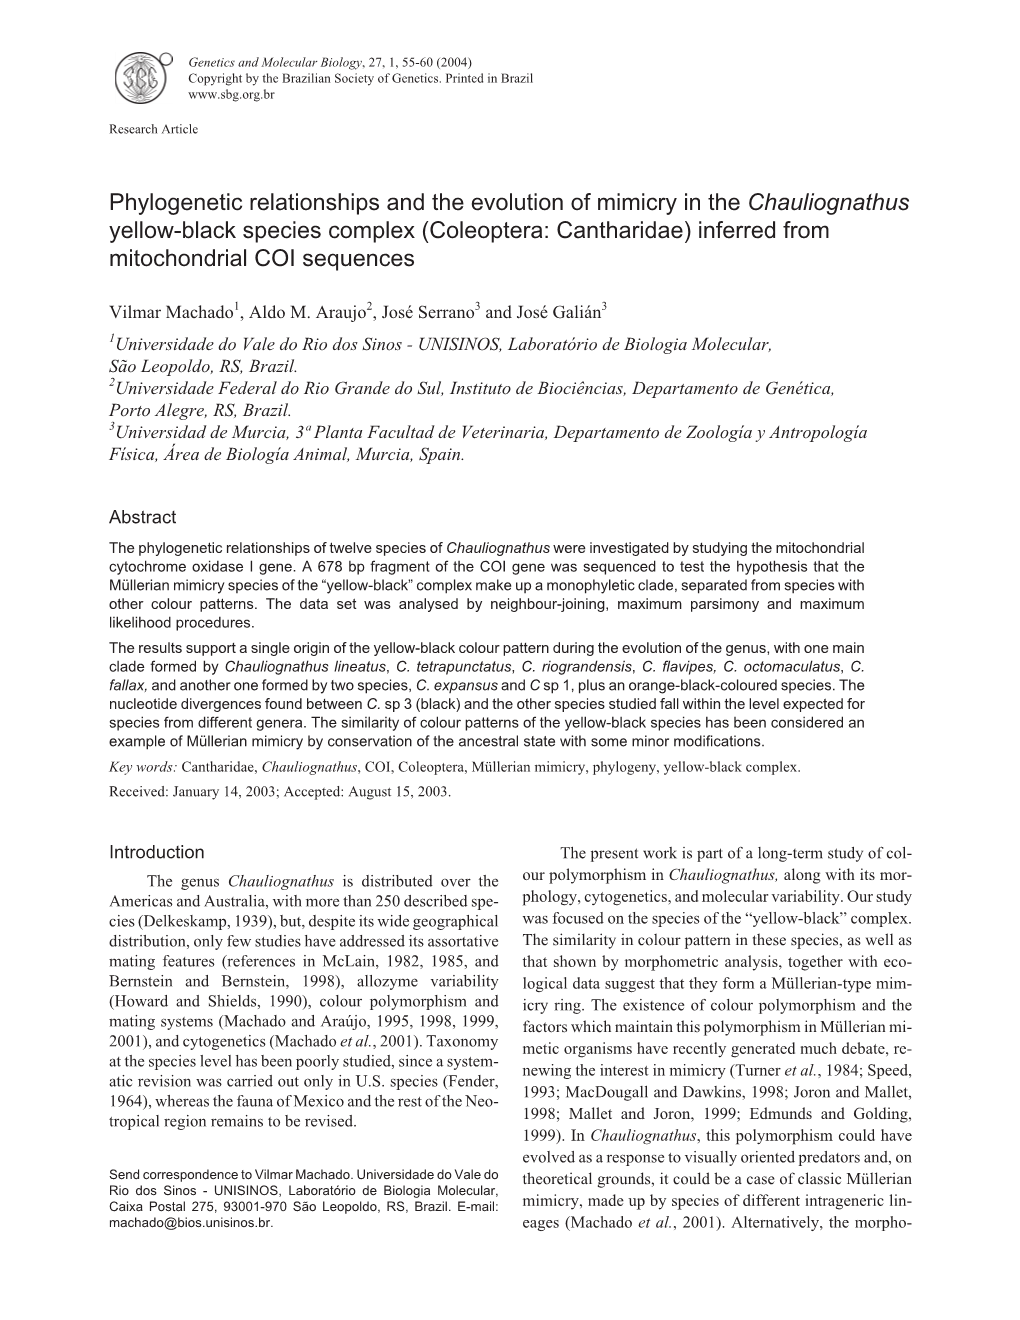 Phylogenetic Relationships and the Evolution of Mimicry in The